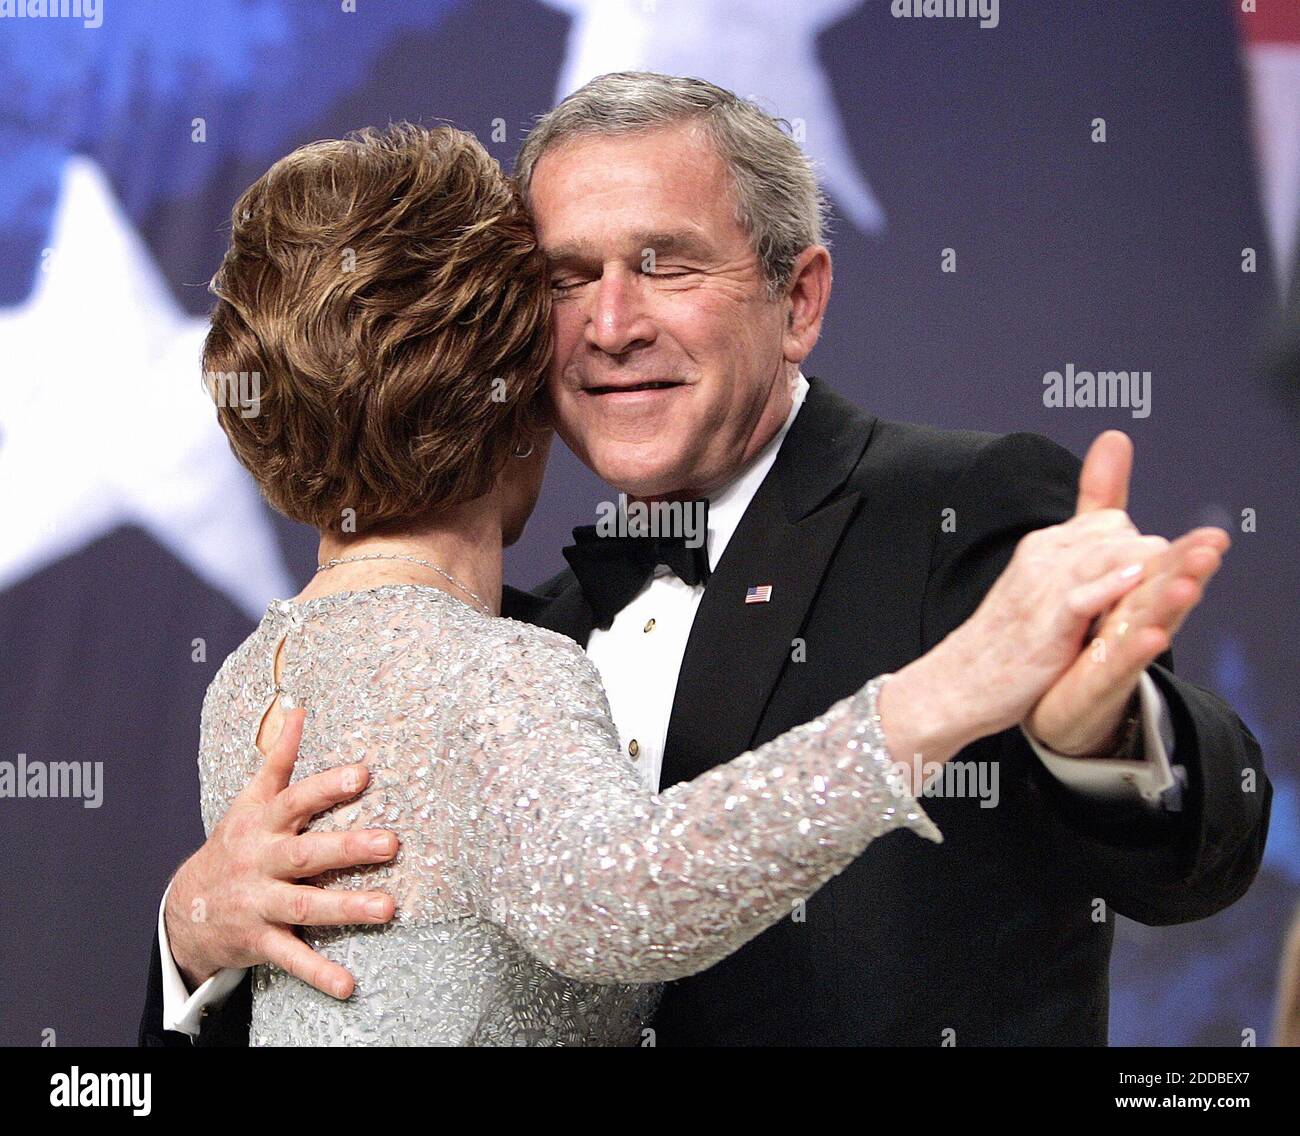 NO FILM, NO VIDEO, NO TV, NO DOCUMENTARY - President George W. Bush and first lady Laura Bush dance at the Independence Ball, part of the inauguration festivities in Washington, DC, USA, on January 20, 2005. Photo by Chuck Kennedy/US News Story Slugged/KRT/ABACA. Stock Photo